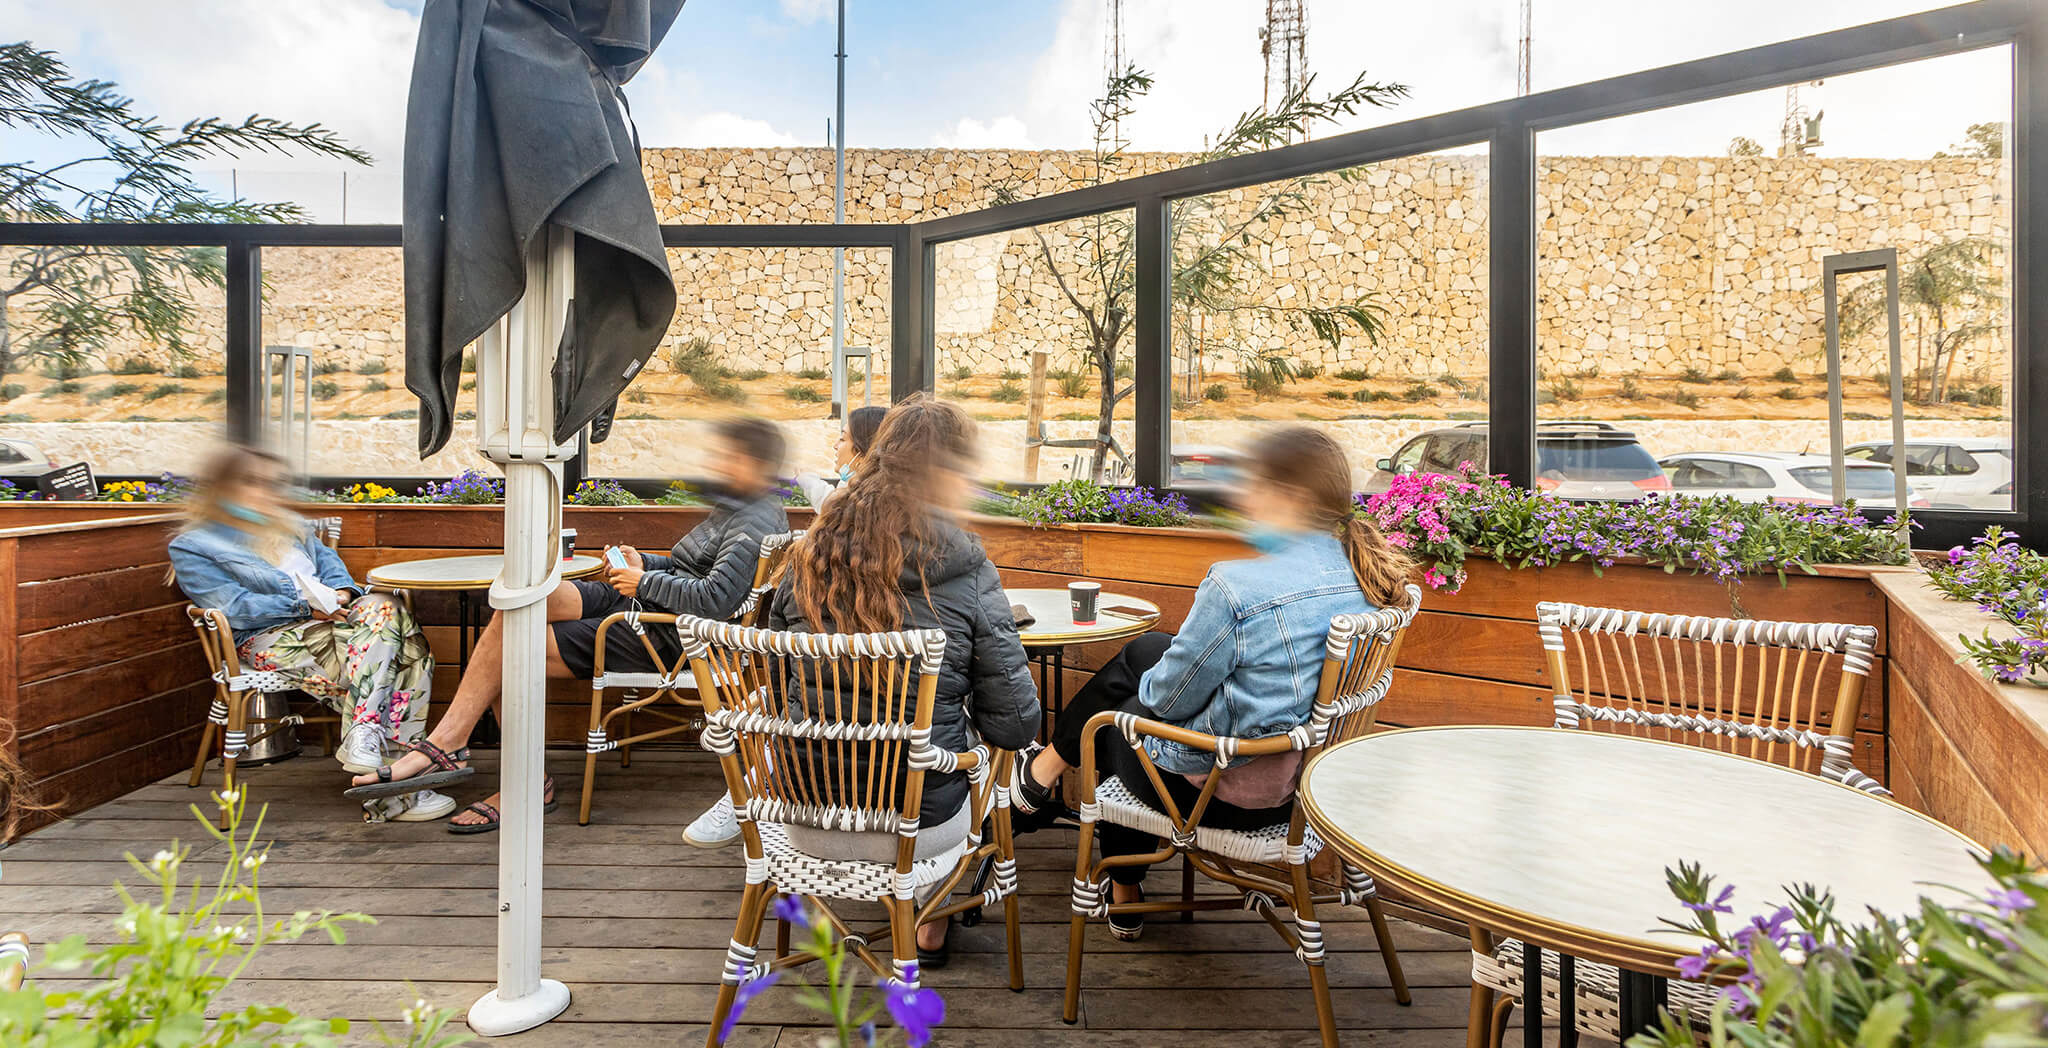 Outdoor seating area Mitzpe Ramon branch